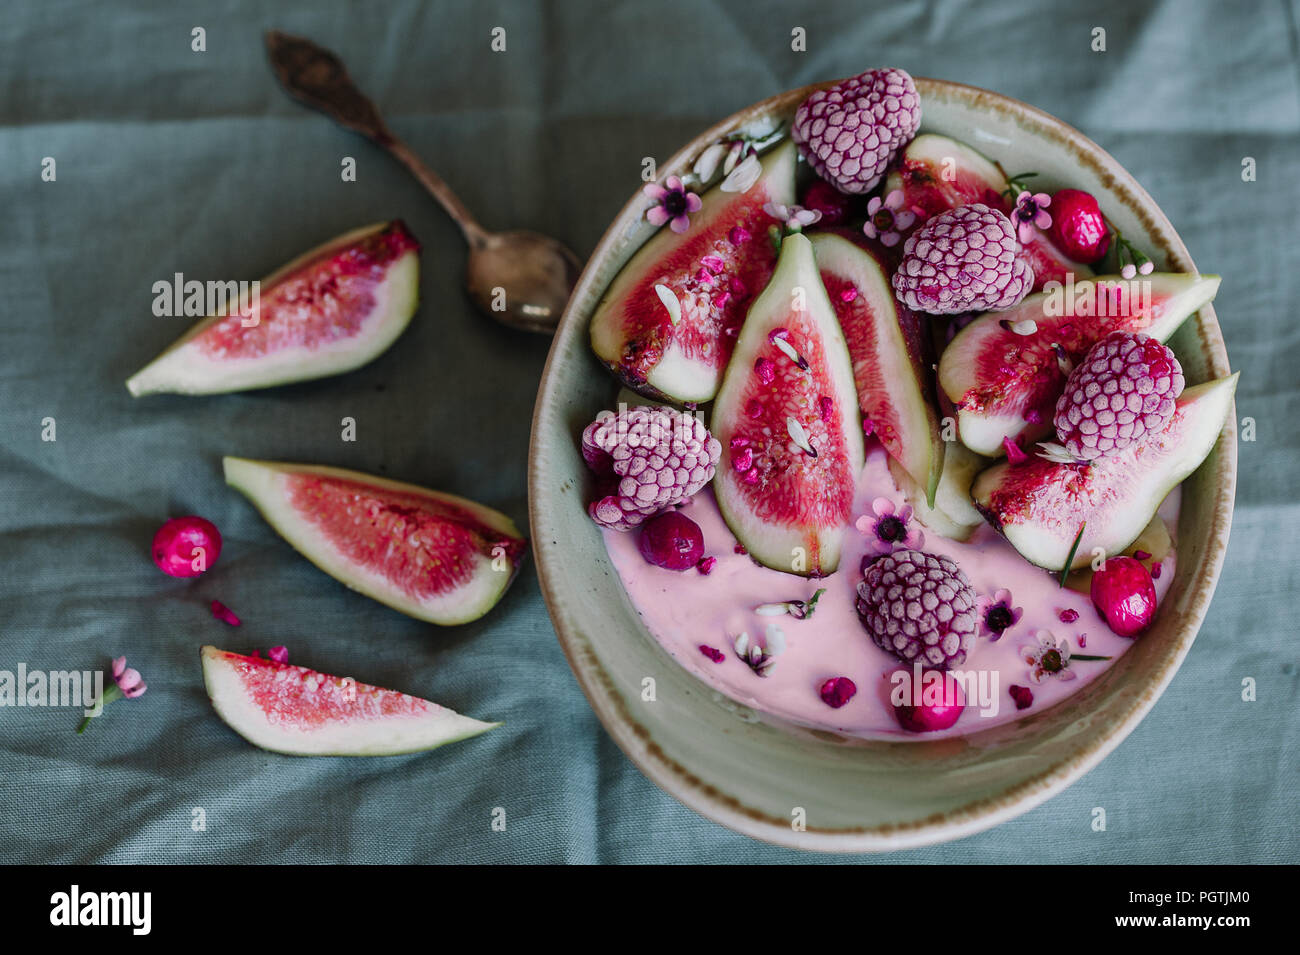 Healthy breakfast bowl with yogurt, fresh figs and frozen berries Stock Photo